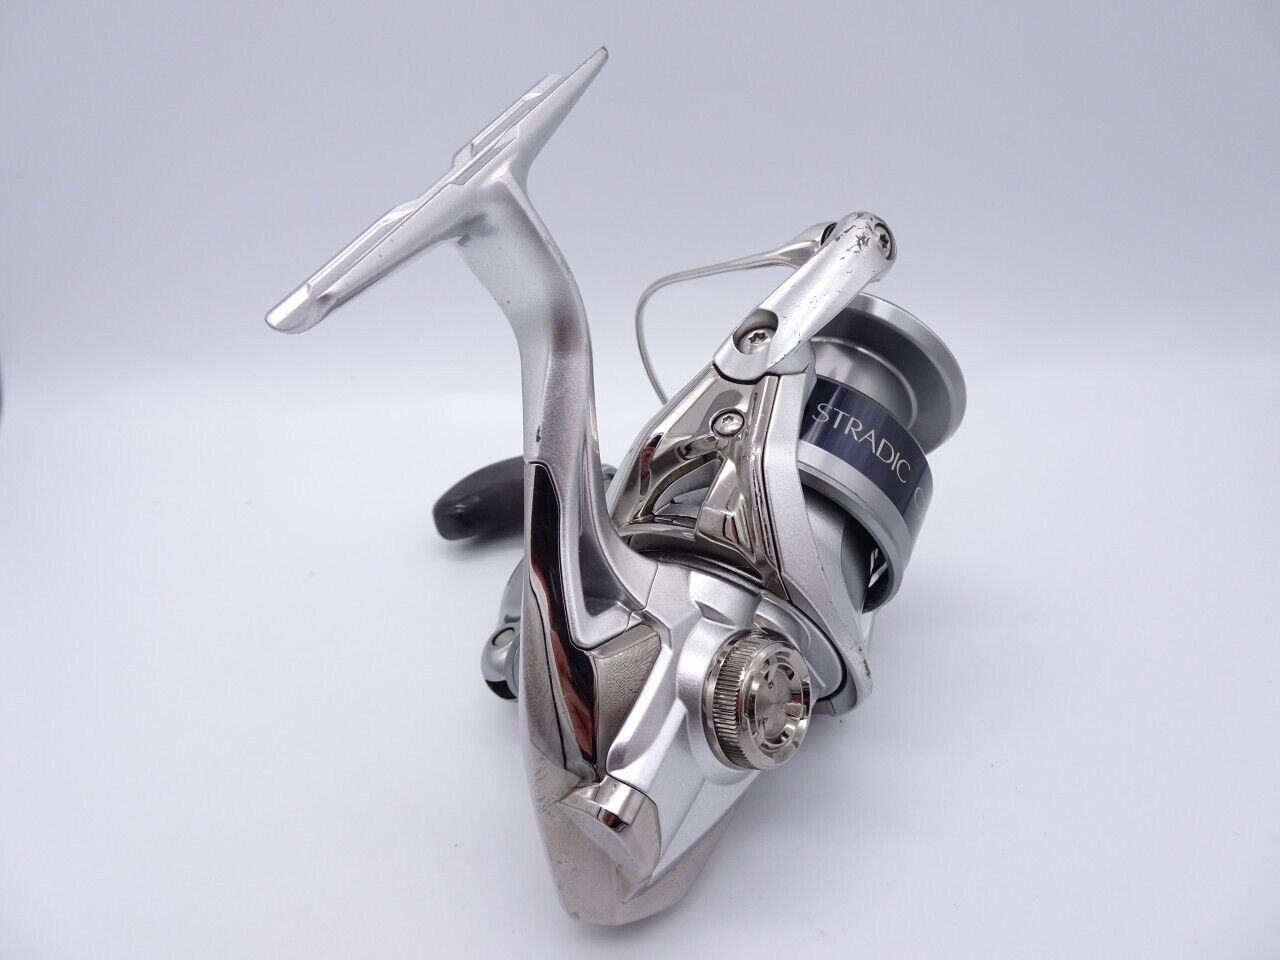 Shimano 15 STRADIC C3000HG Spinning Reel Gear Ratio 6.0:1 230g F/S from Japan